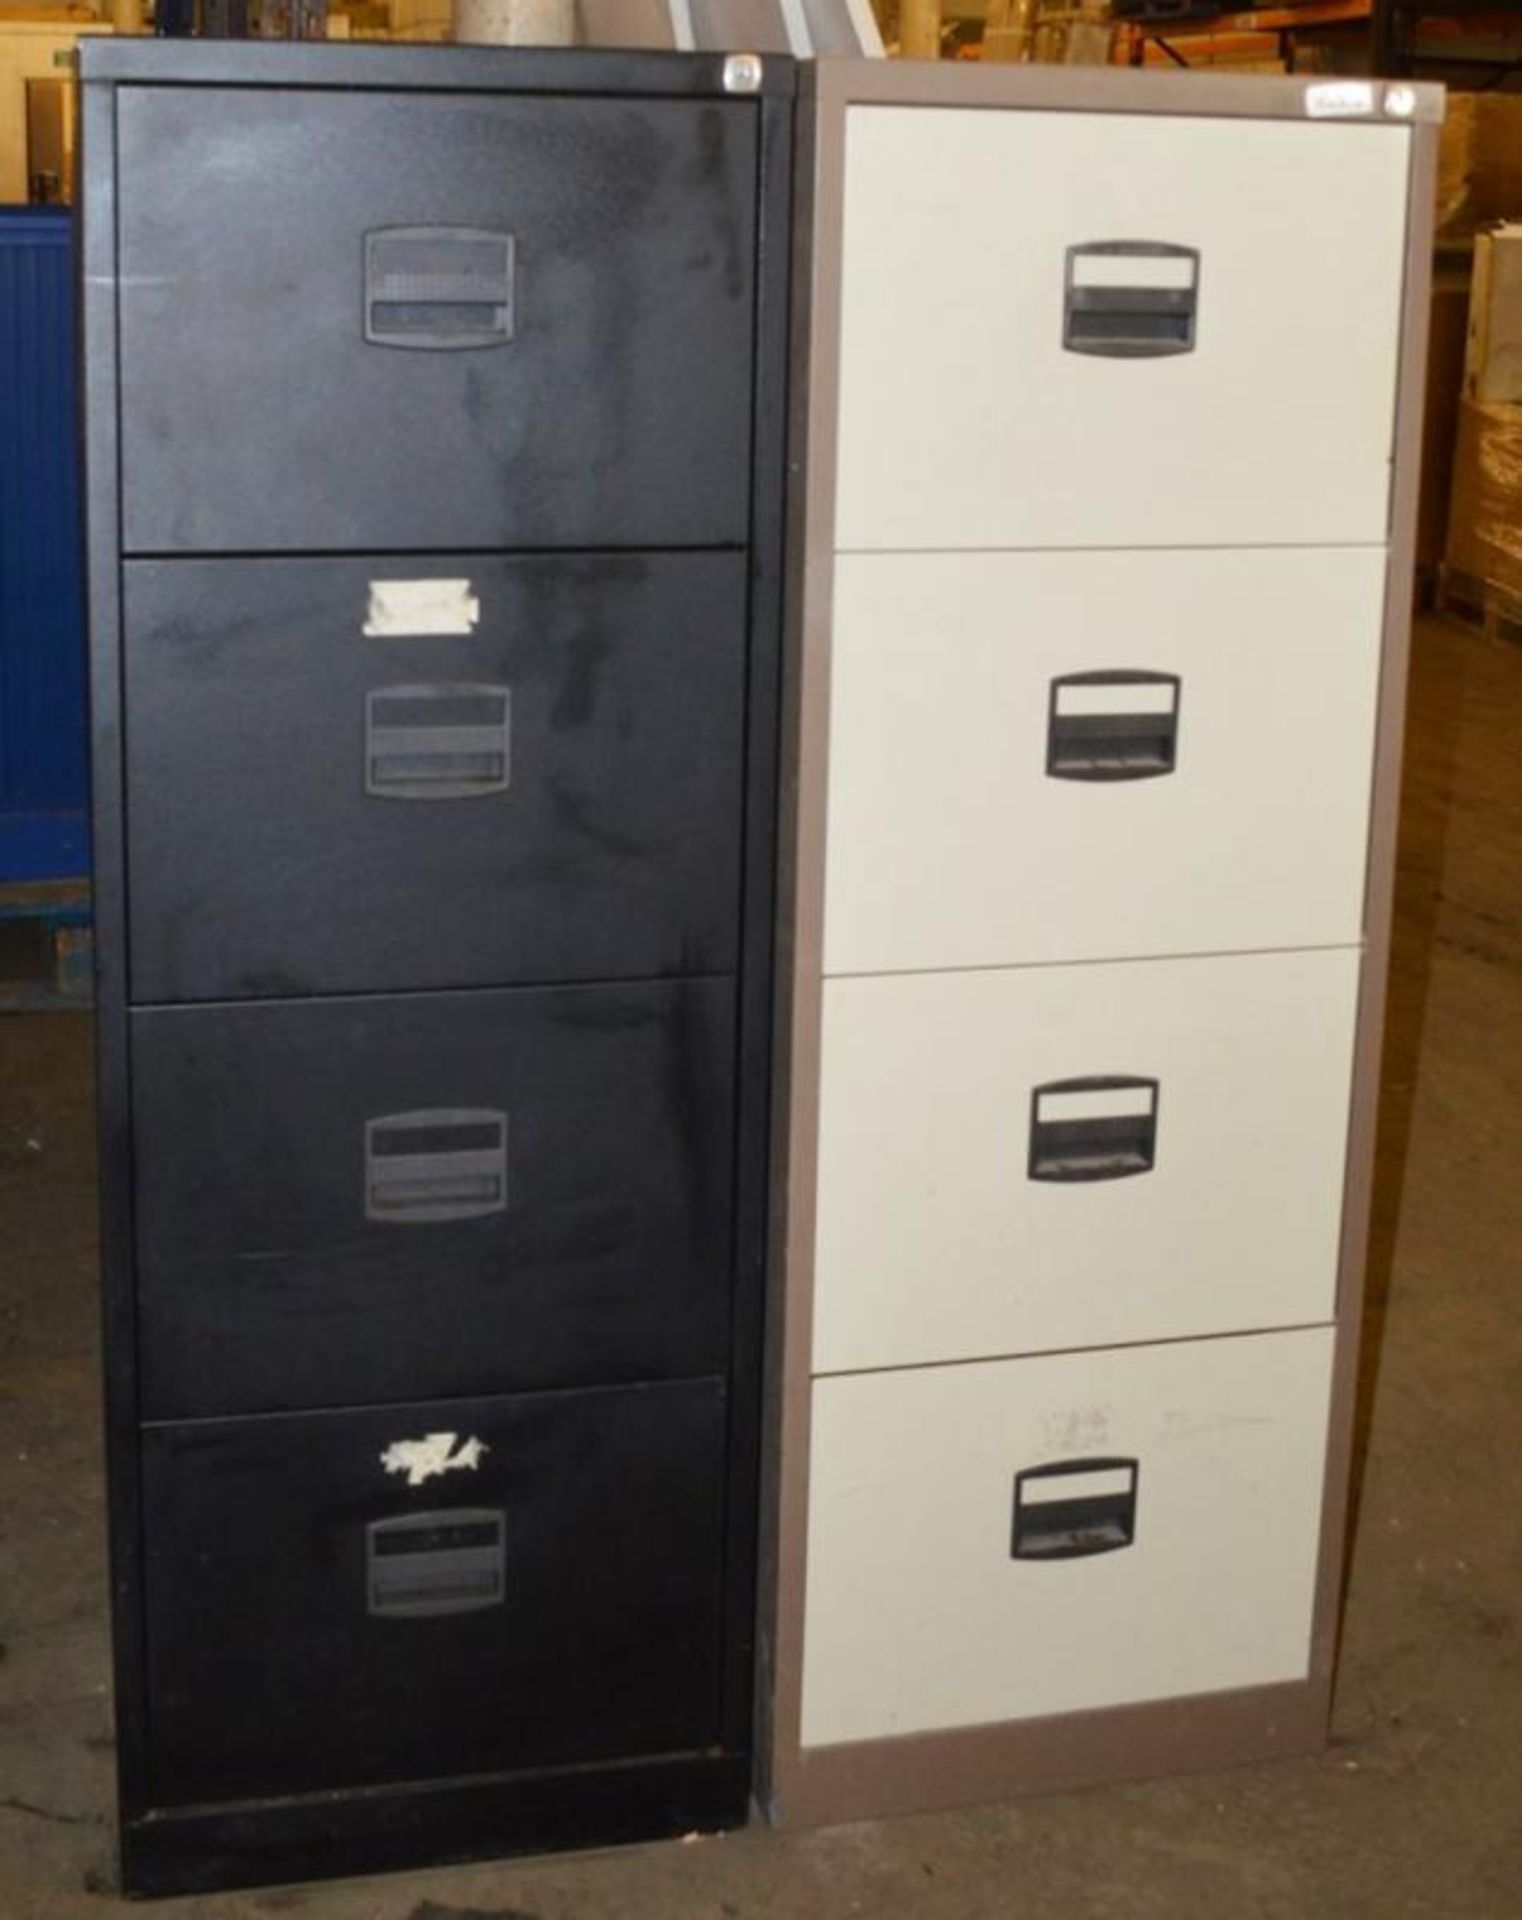 2 x Metal Filing Cabinets - Dimensions: H132 x W47 x D63cm - Used, Open, No Keys - Low Start, No Res